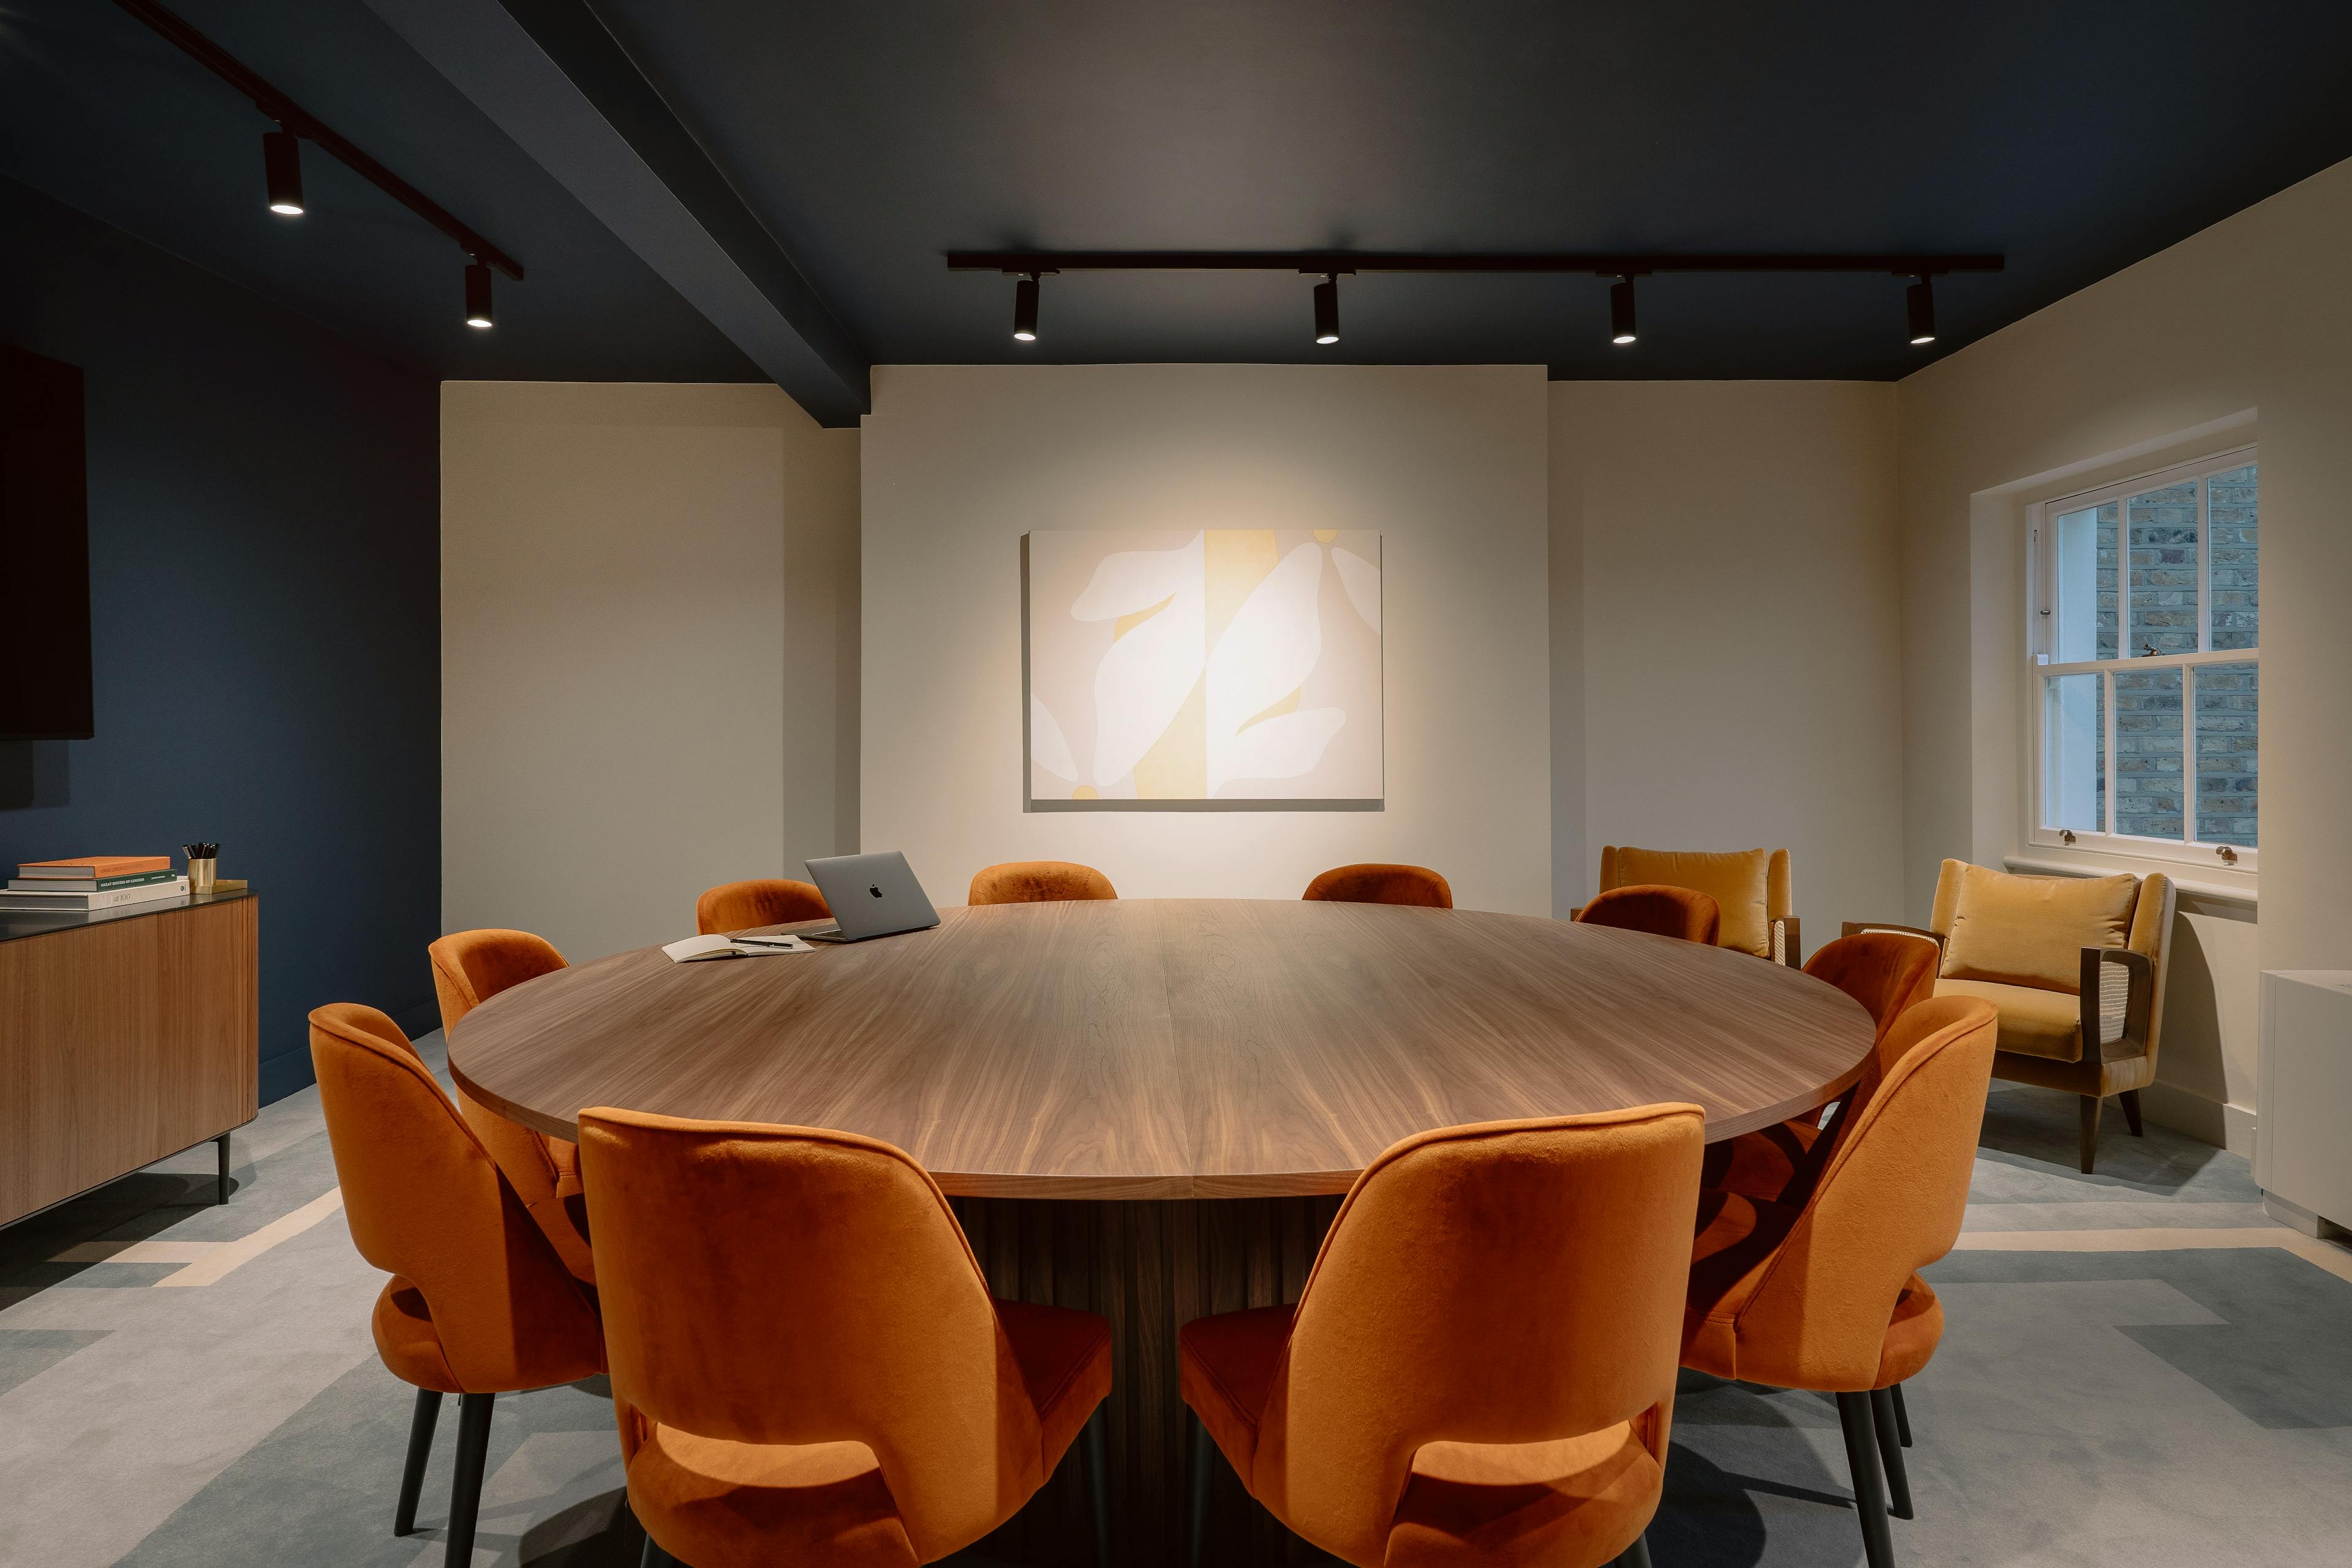 A boardroom at the Chief London clubhouse, featuring a circular wooden table with orange chairs and a neutral floral painting by artist Senem Oezdogan installed on a beige wall.